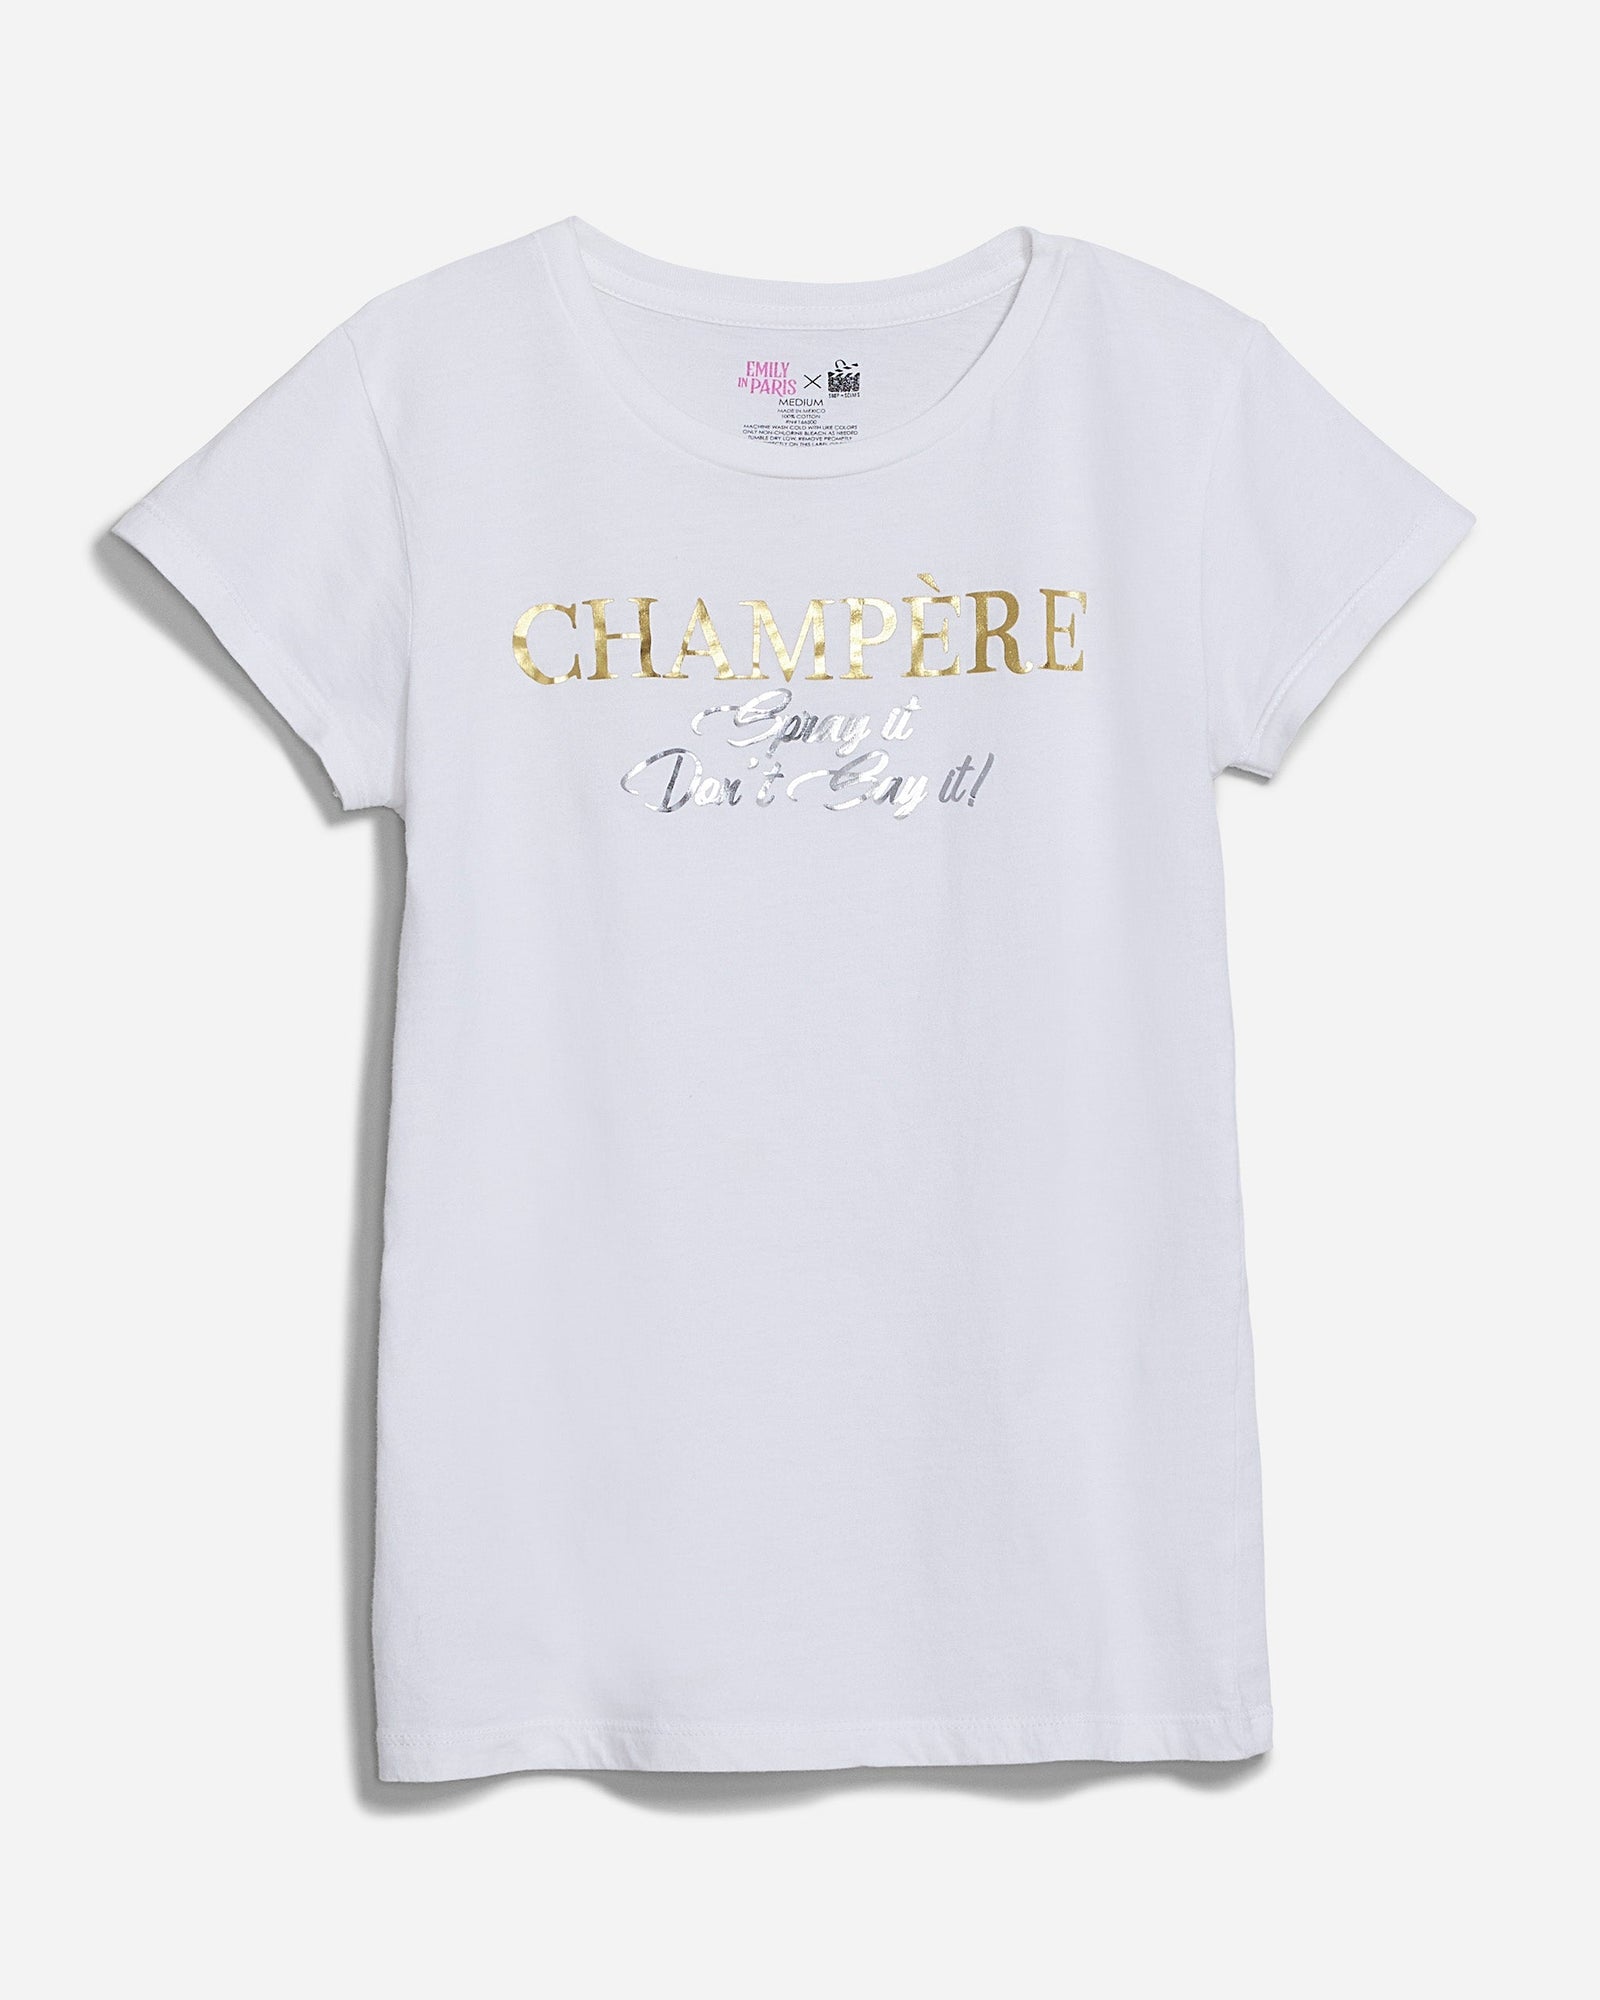 Champére Spray It Don't Say It Classic Tee